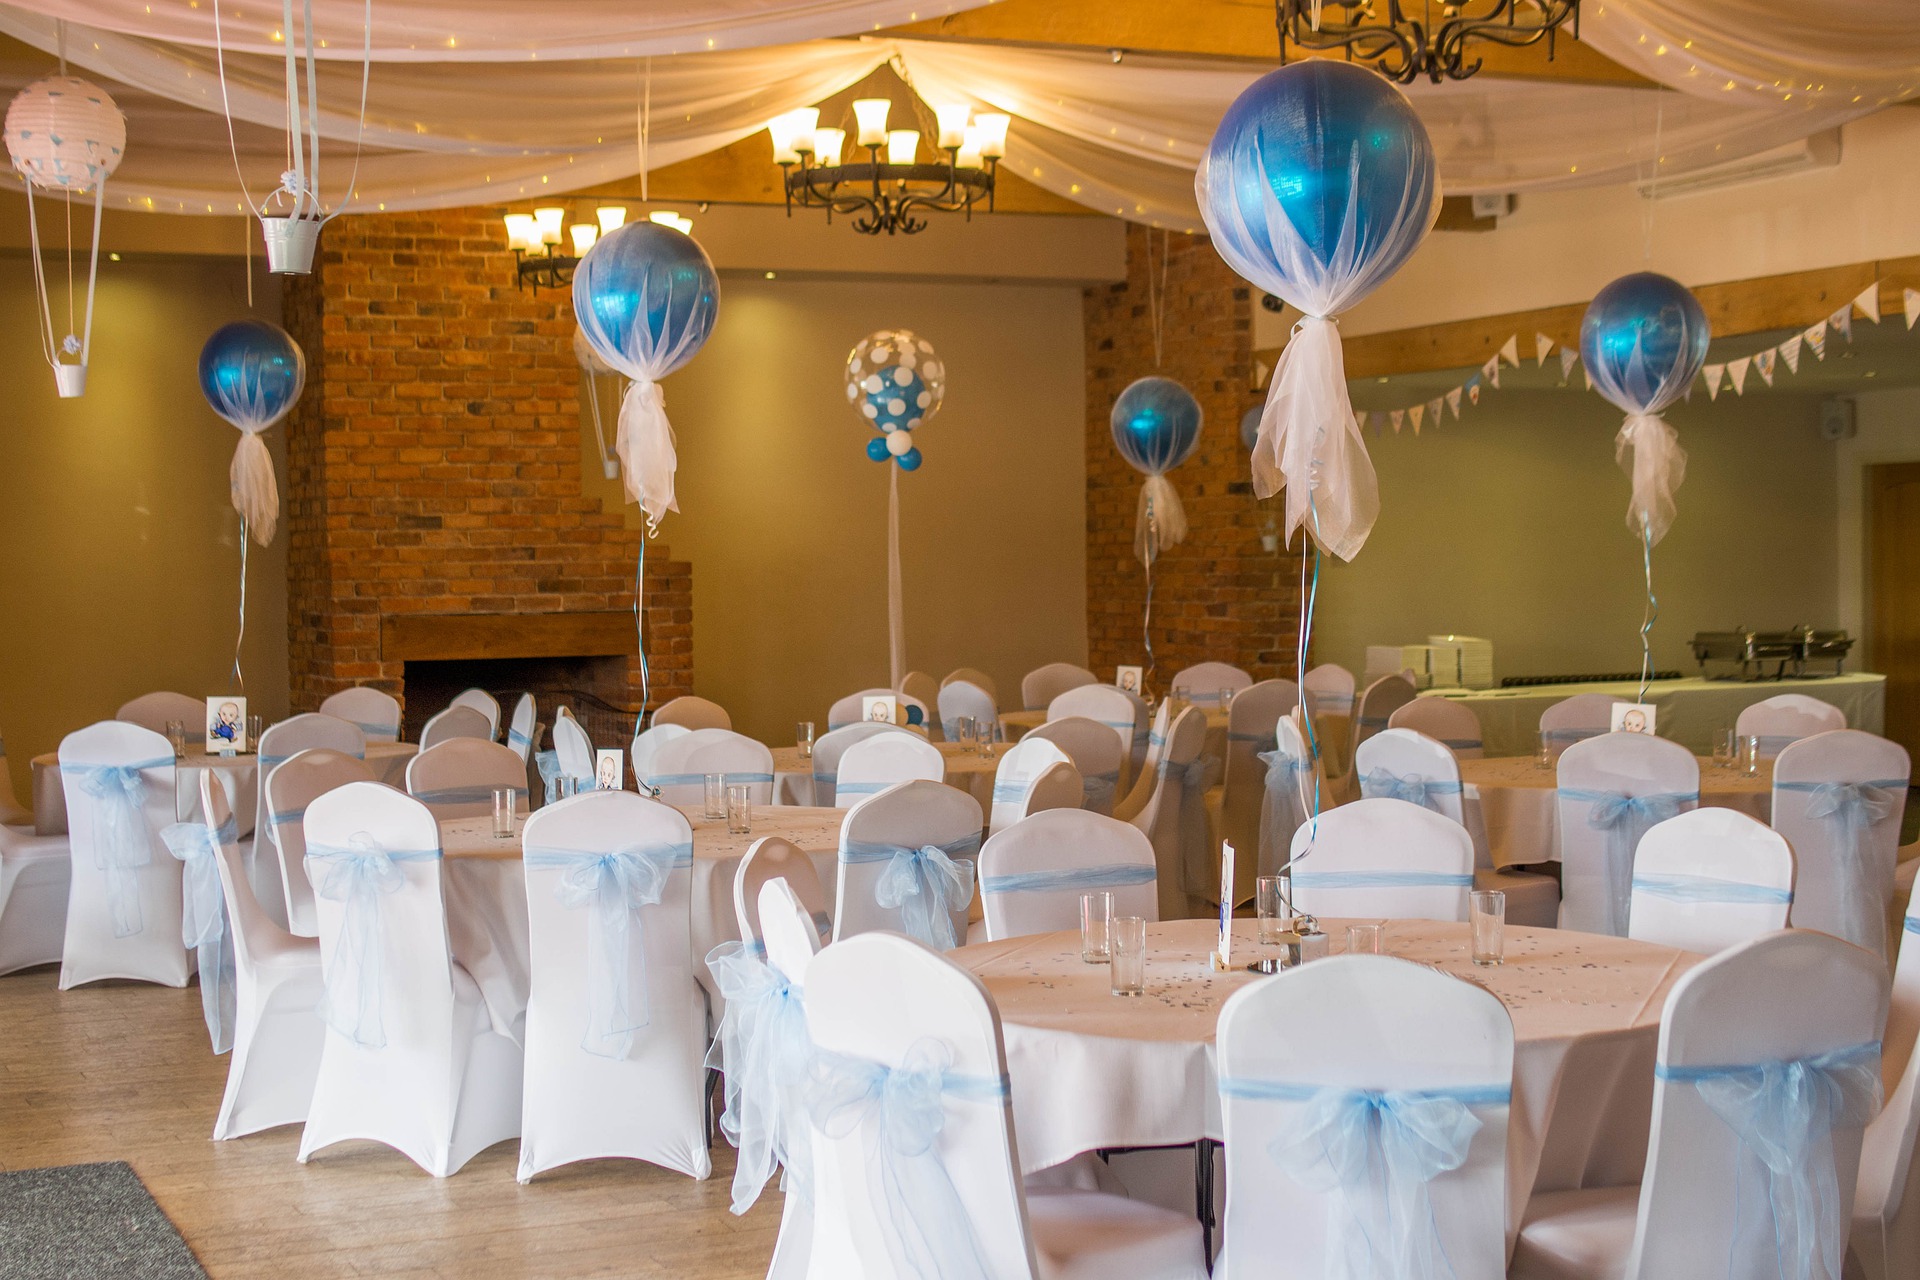 Wedding Decorations - Party Place in Long Island